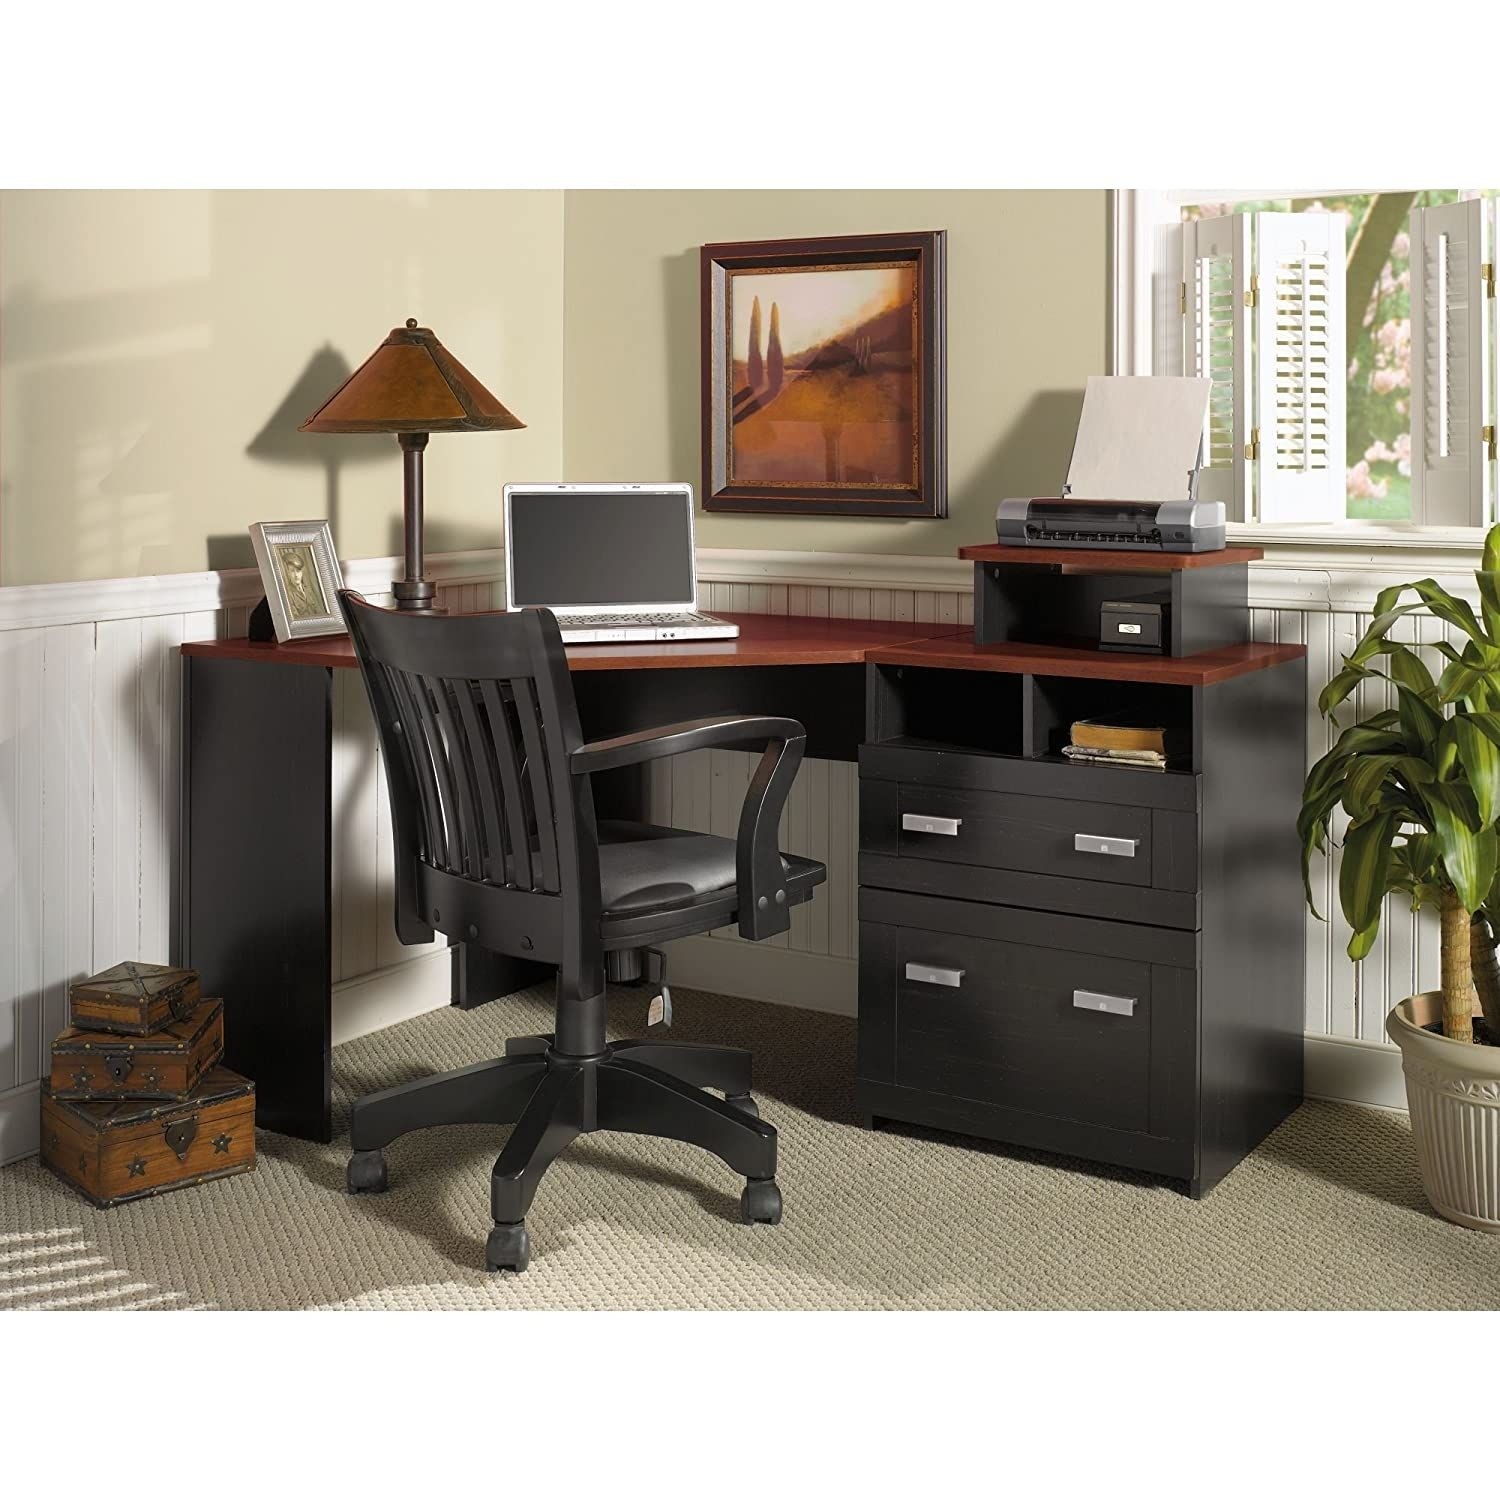 Corner home office furniture of wooden desk with drawer and